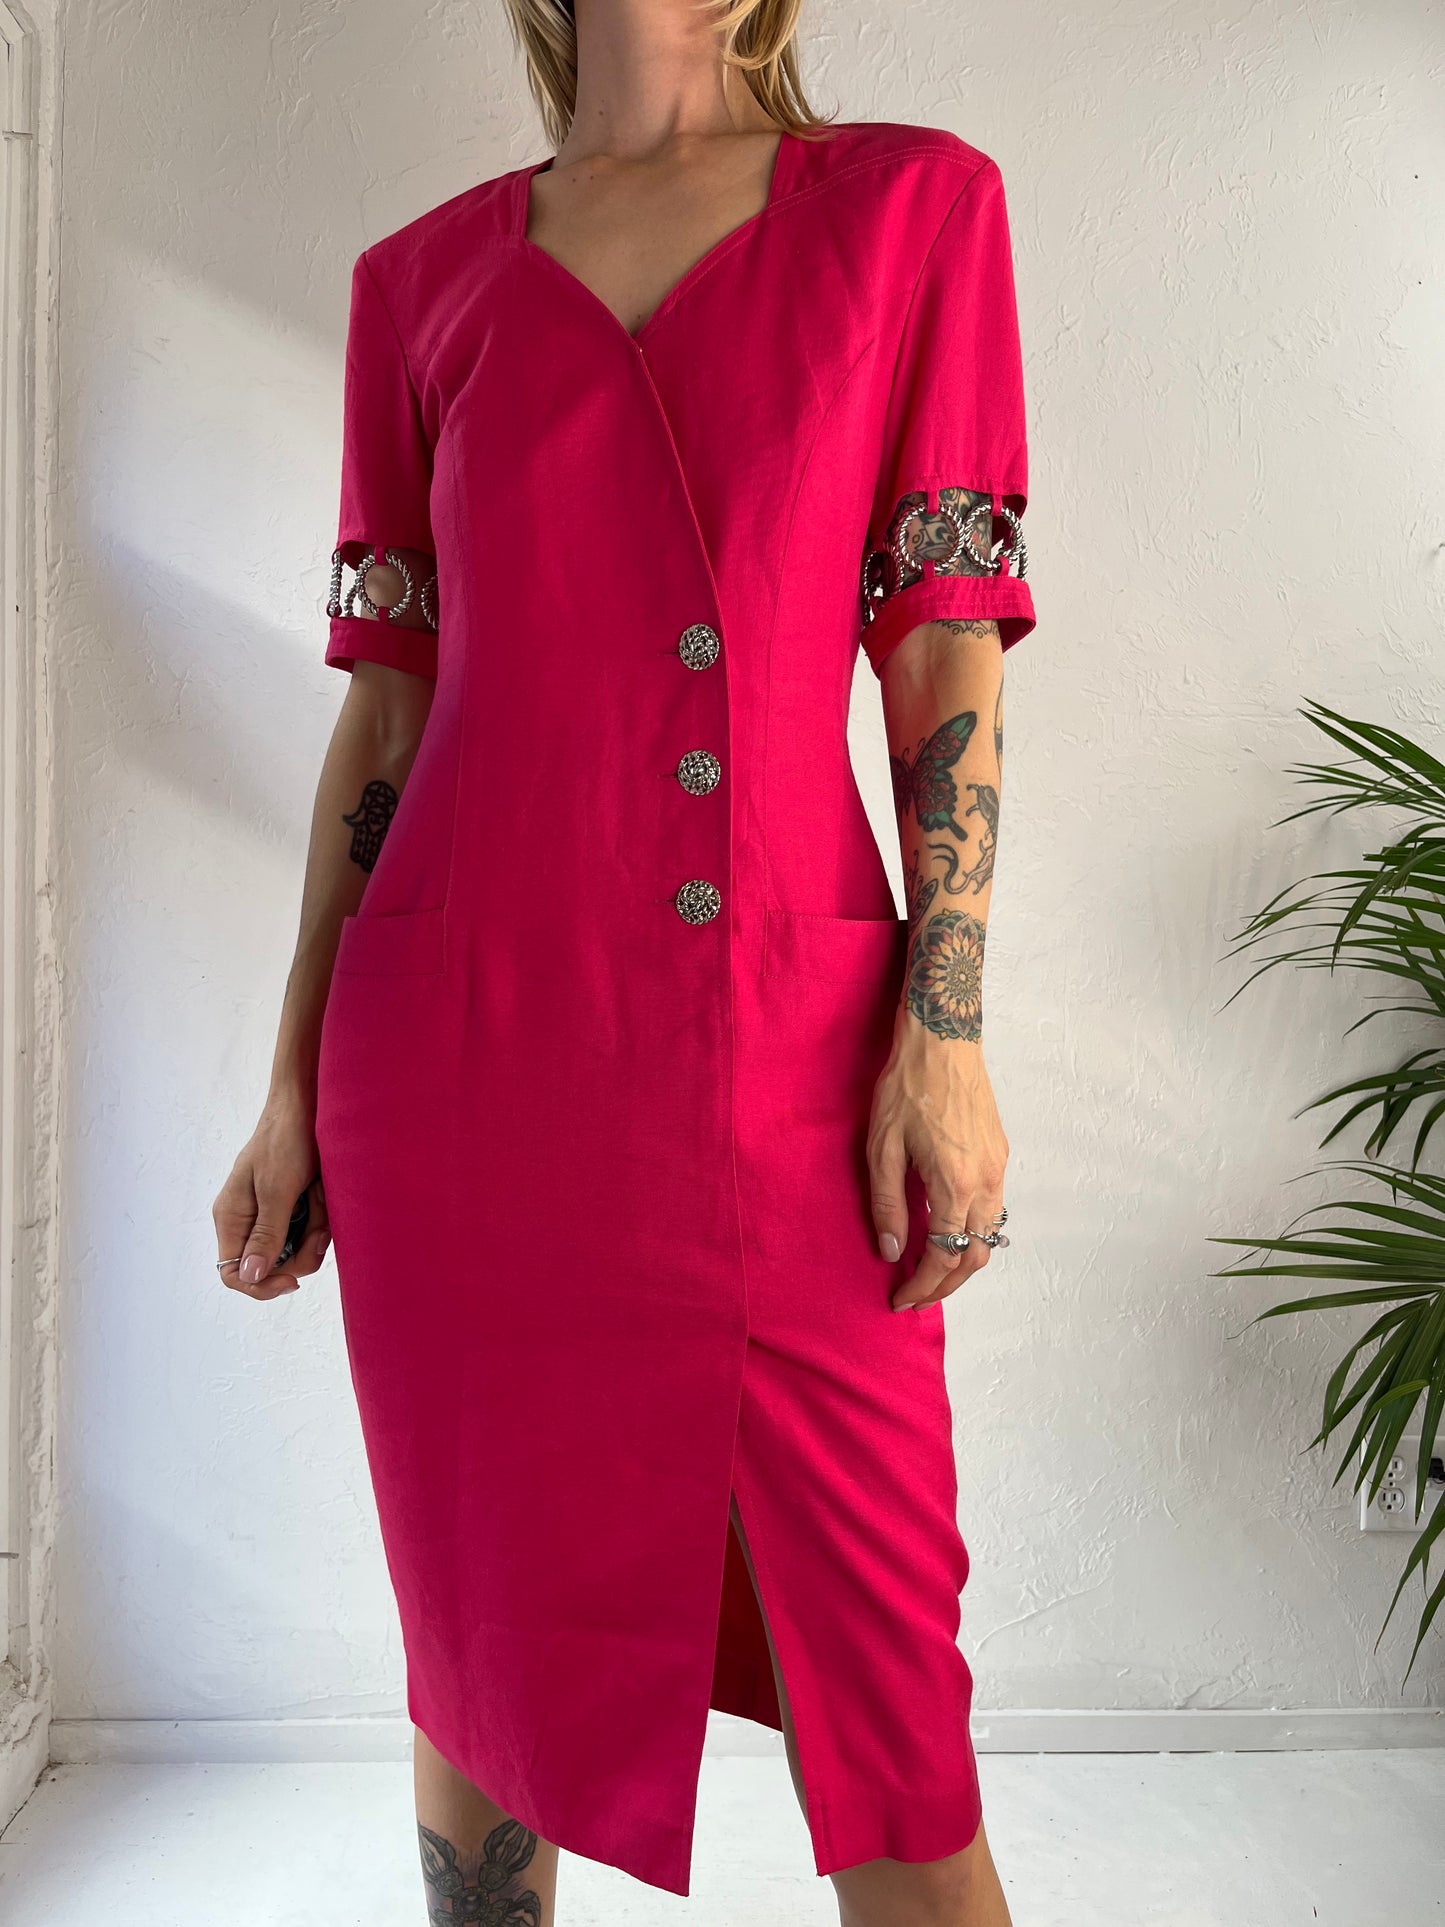 90s 'Jackie K' Made in Canada Hot Pink Button Up Mod Wiggle Dress / Small